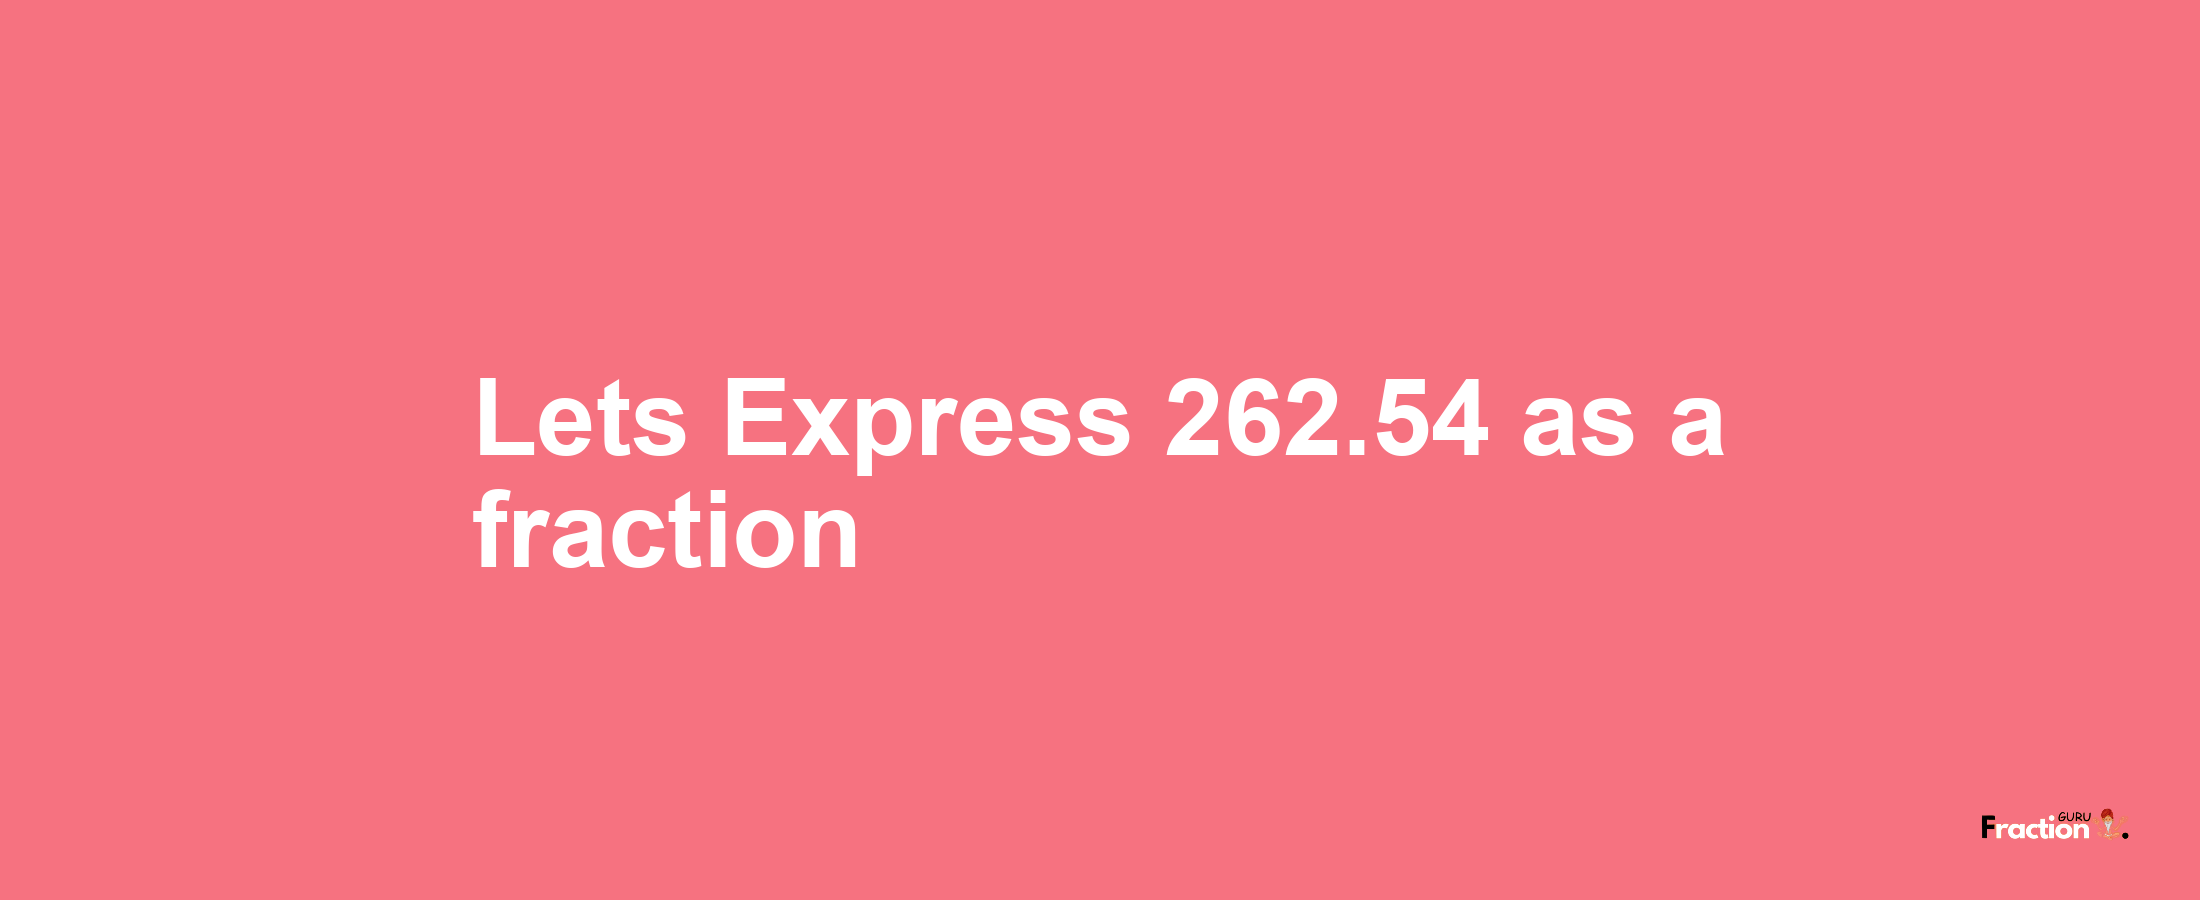 Lets Express 262.54 as afraction